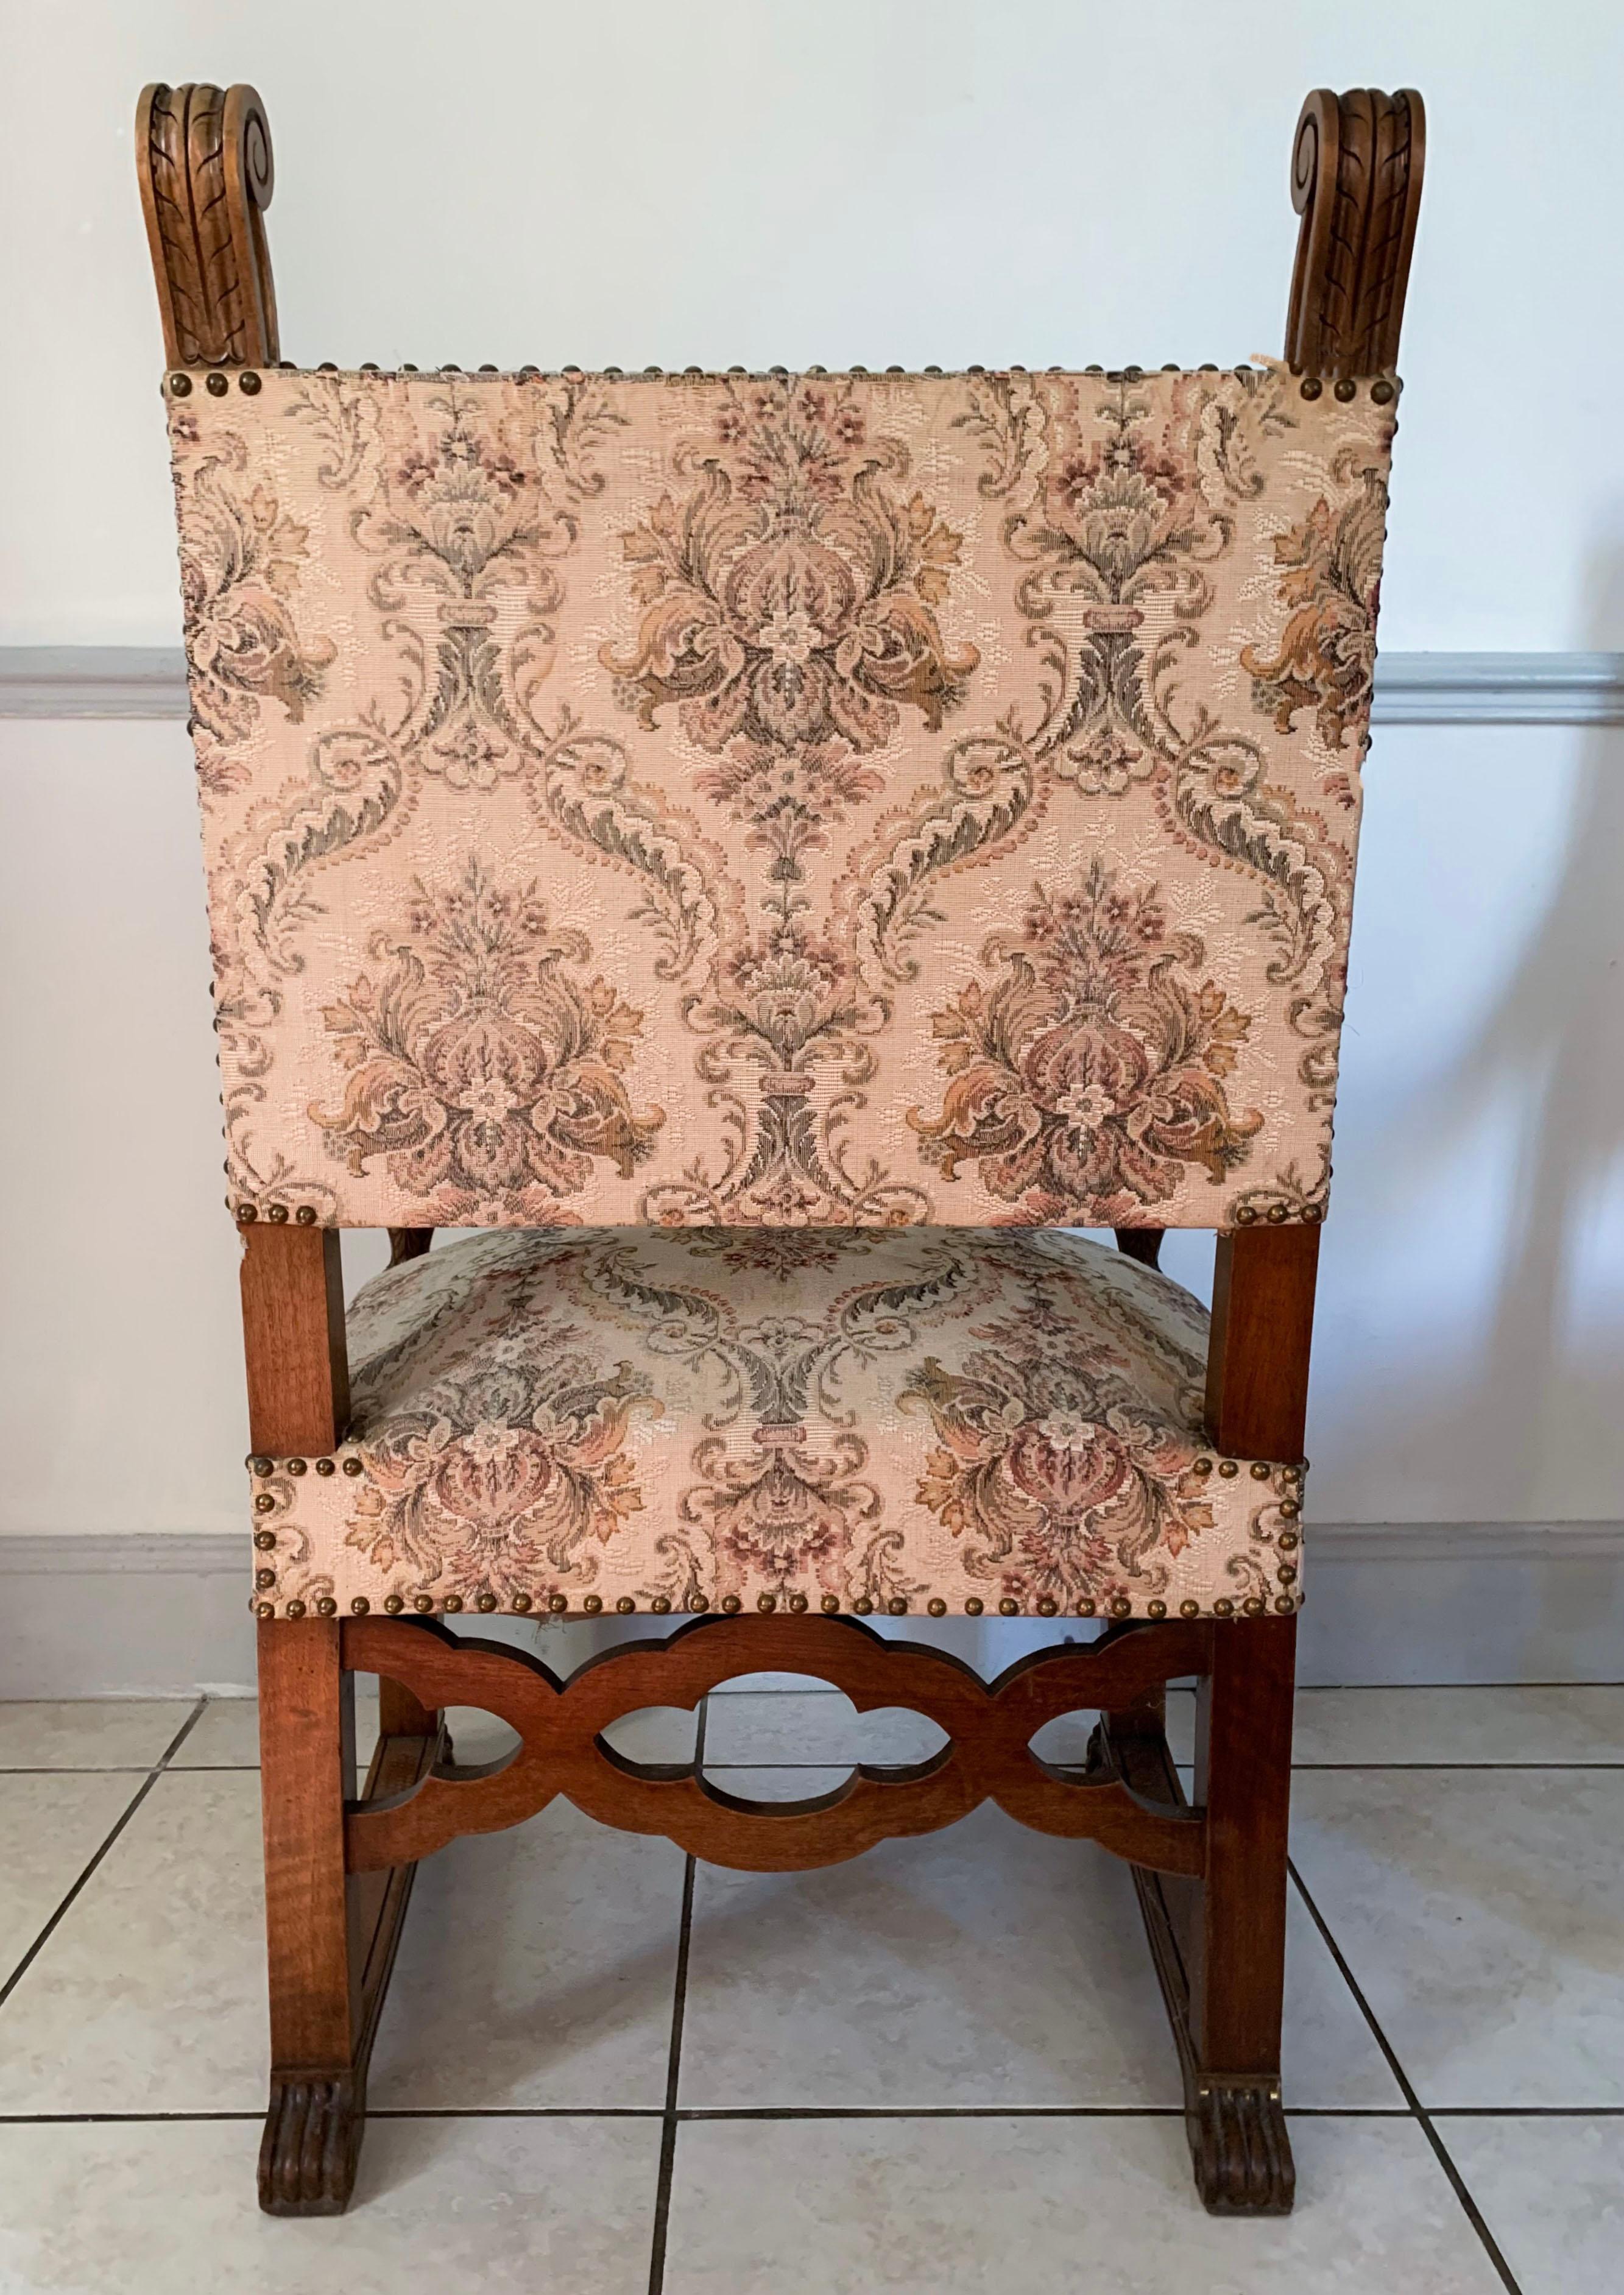 Charming pair of armchairs of Neo-Renaissance style dating from the end of the 19th century. The base is said to be in lion's paw for the front legs. The crosspiece connecting the legs is composed of frieze of four-lobed ovals decorated with